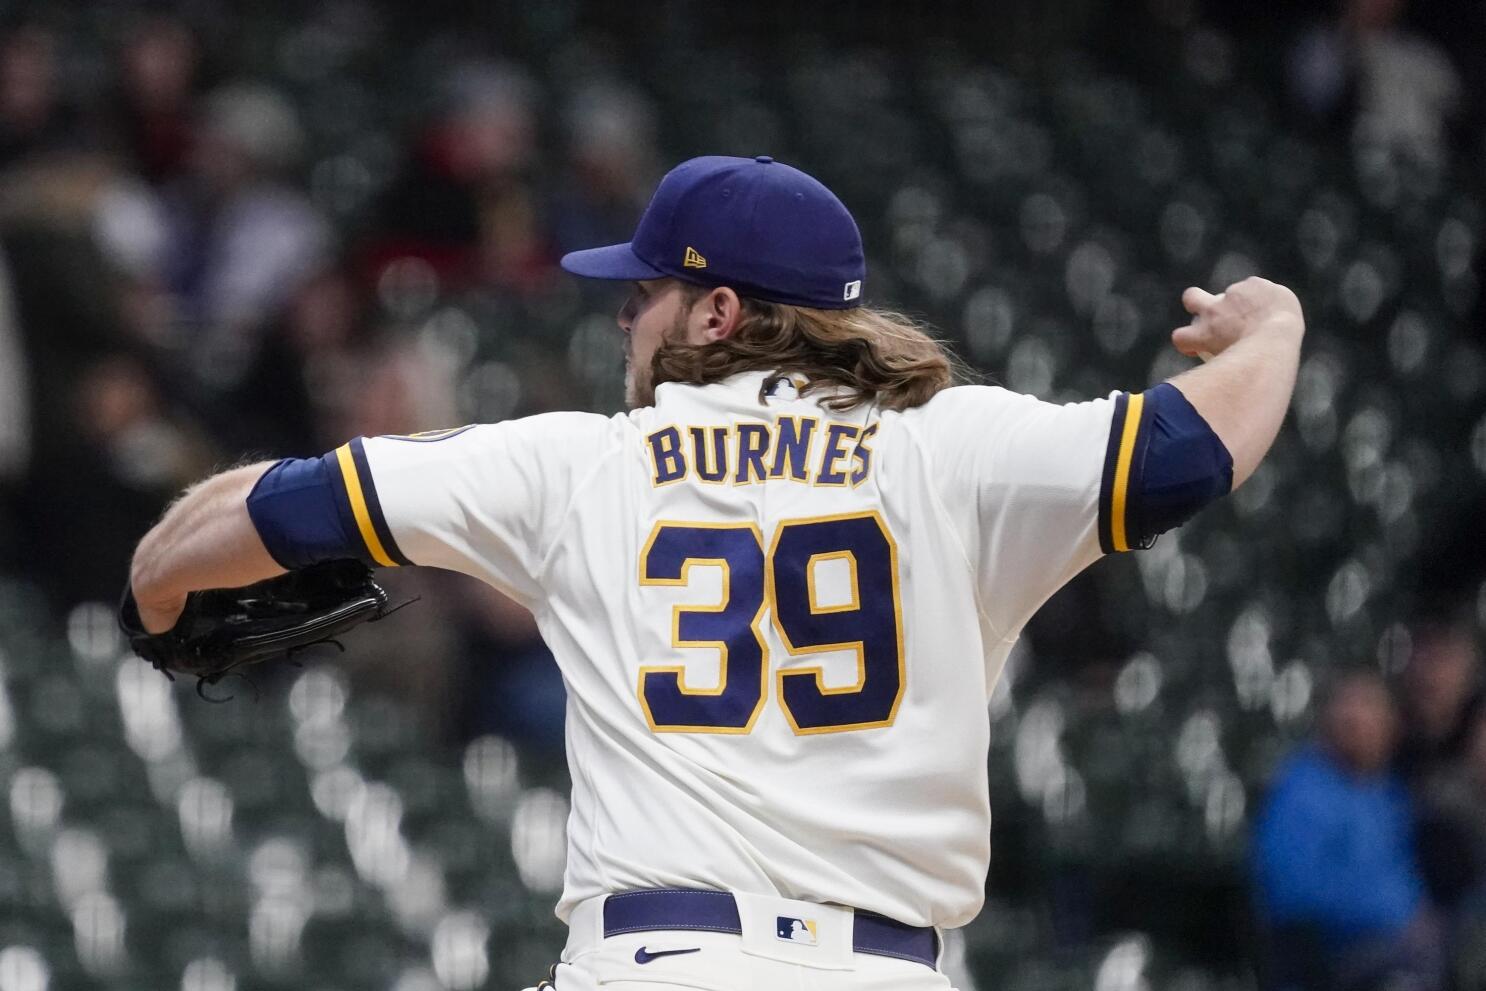 Arrieta battered by Brewers while Burnes dominates